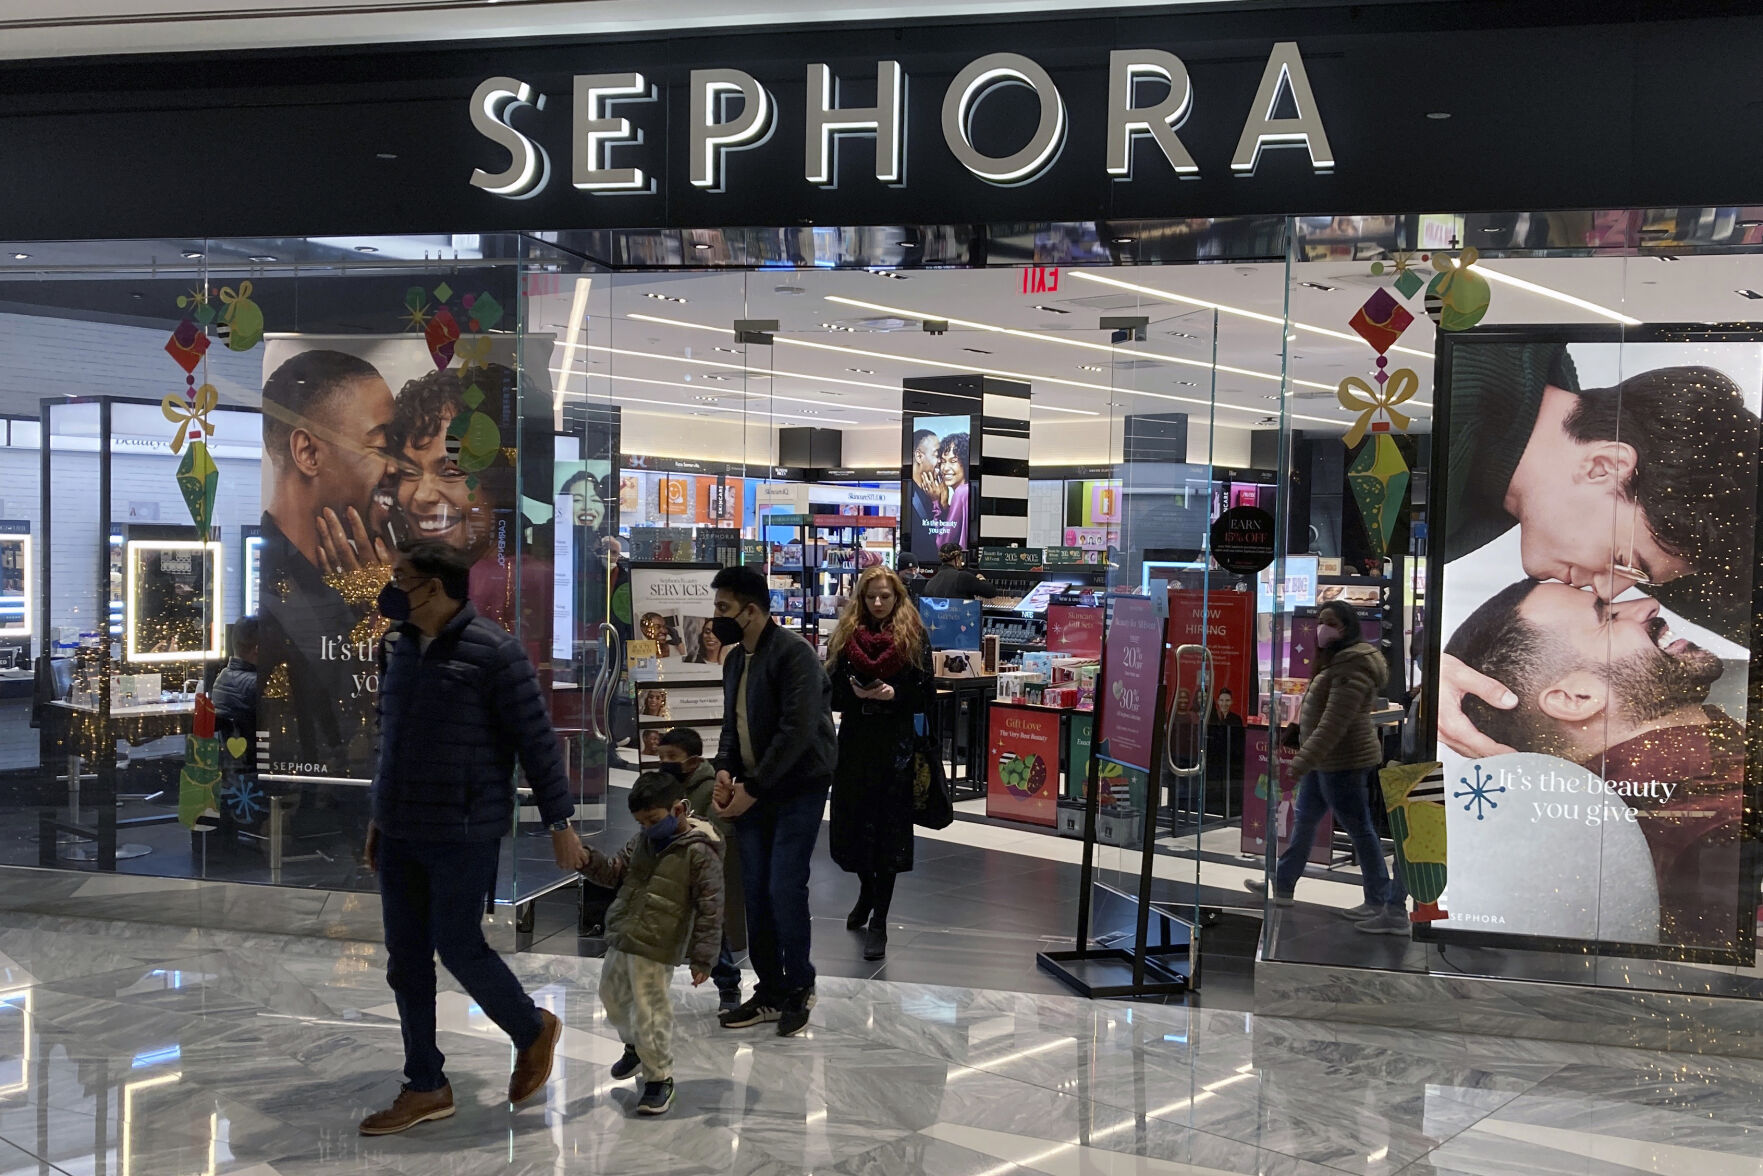 <p>File - People leave a Sephora store in the Hudson Yards shopping mall in New York City on Saturday, December 4, 2021. On June 1, Sephora started requiring a $25 minimum purchase for online customers looking to claim a free gift and 250 loyalty points during their birthday month. (AP Photo/Ted Shaffrey, File)</p>   PHOTO CREDIT: Ted Shaffrey - staff, AP